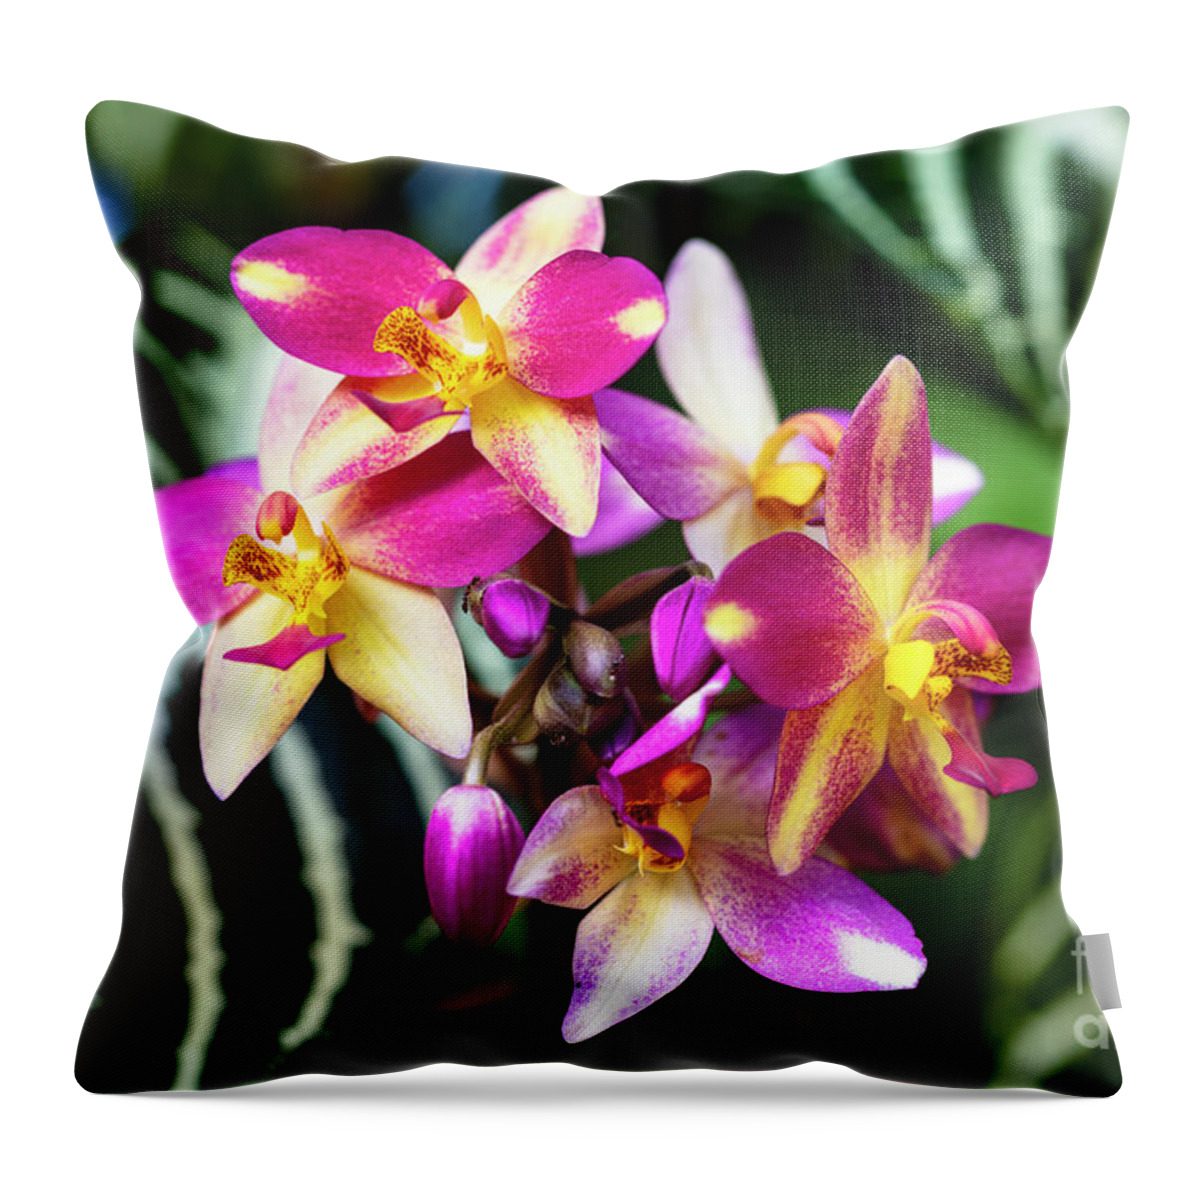 Background Throw Pillow featuring the photograph Purple Orchid Flowers #13 by Raul Rodriguez